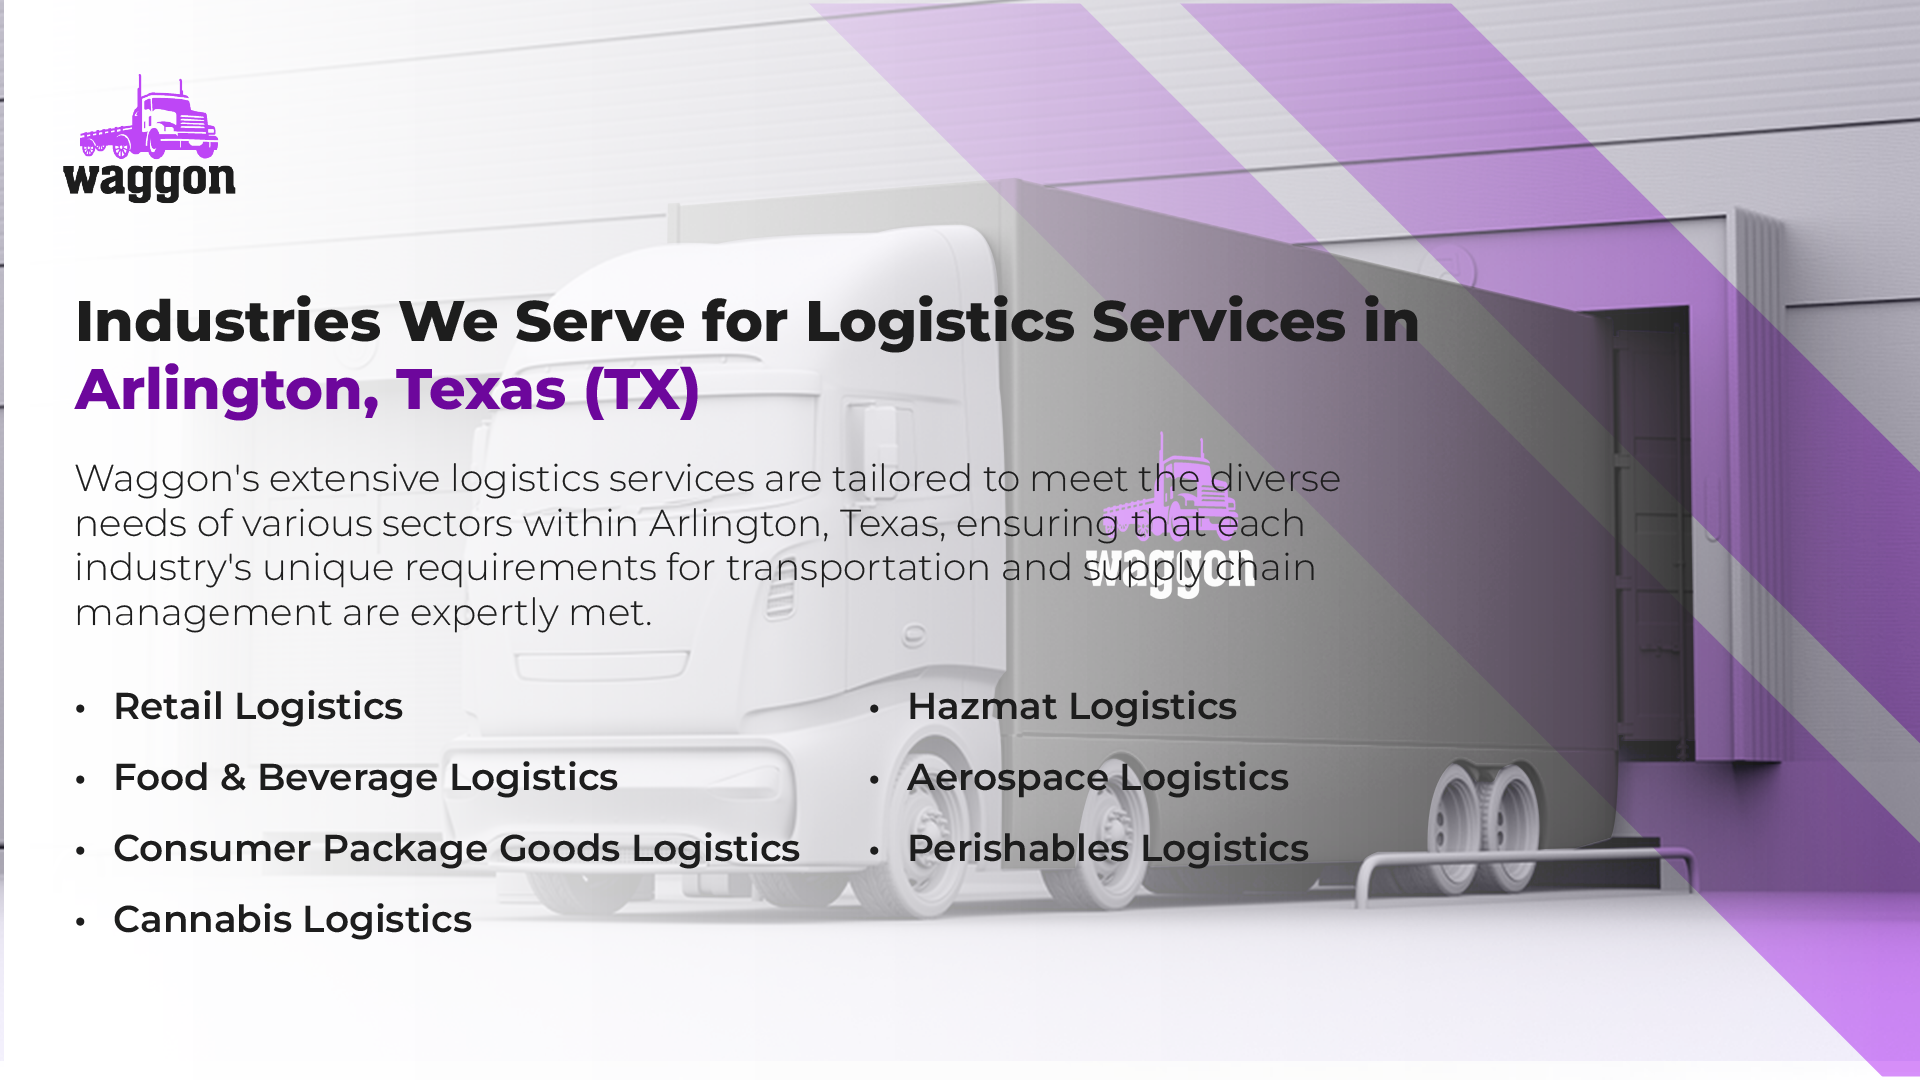 Industries We Serve for Logistics Services in Arlington, Texas (TX)